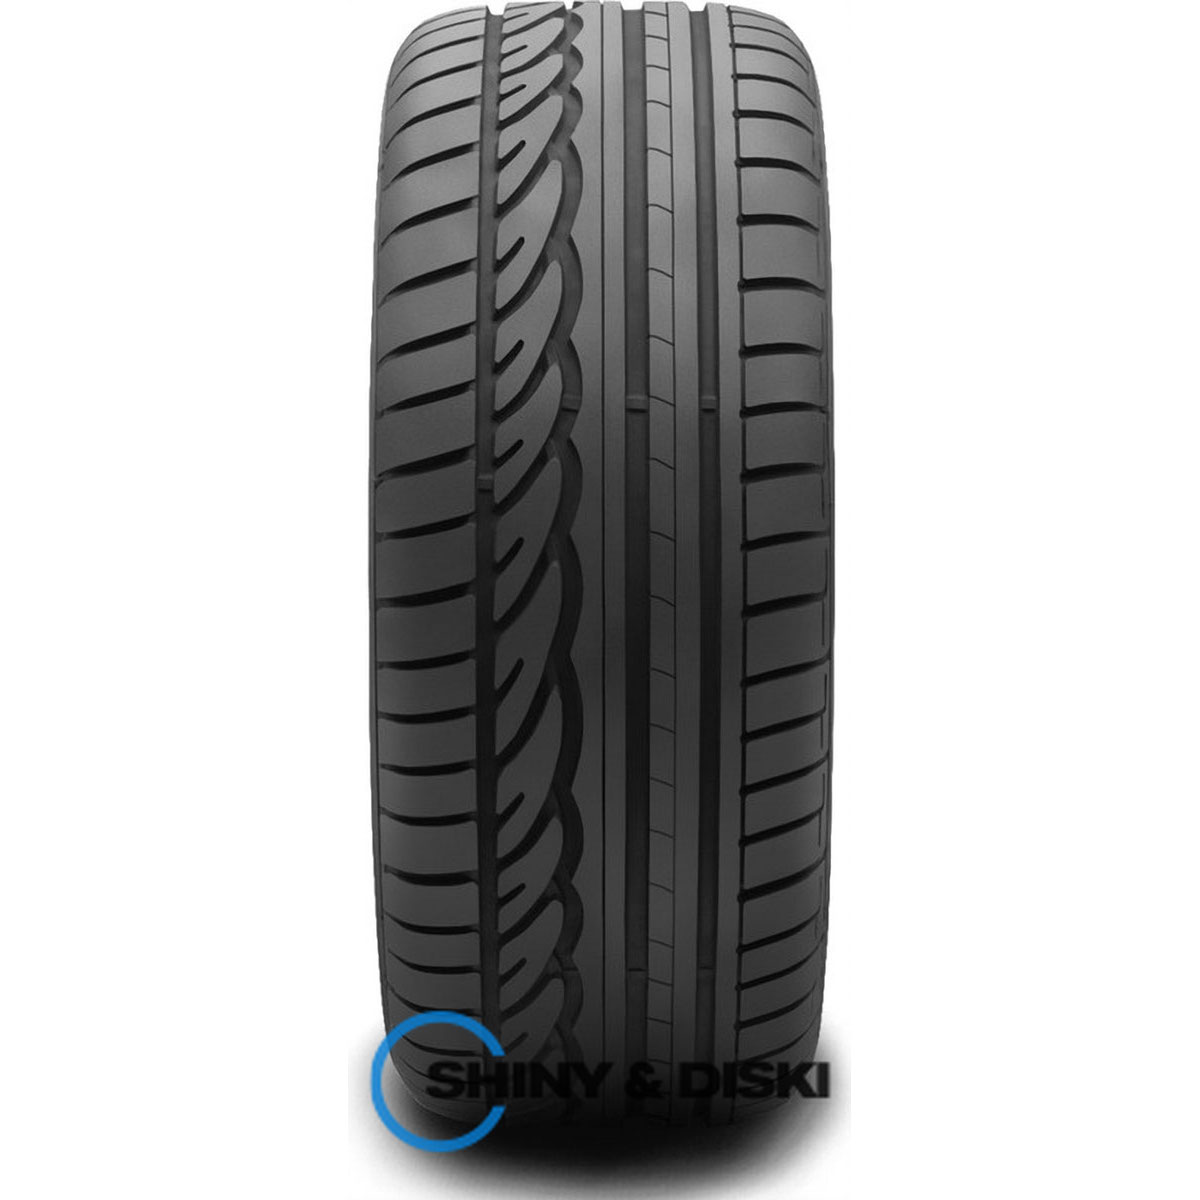 резина dunlop sp sport 01 a/s 185/60 r15 88h